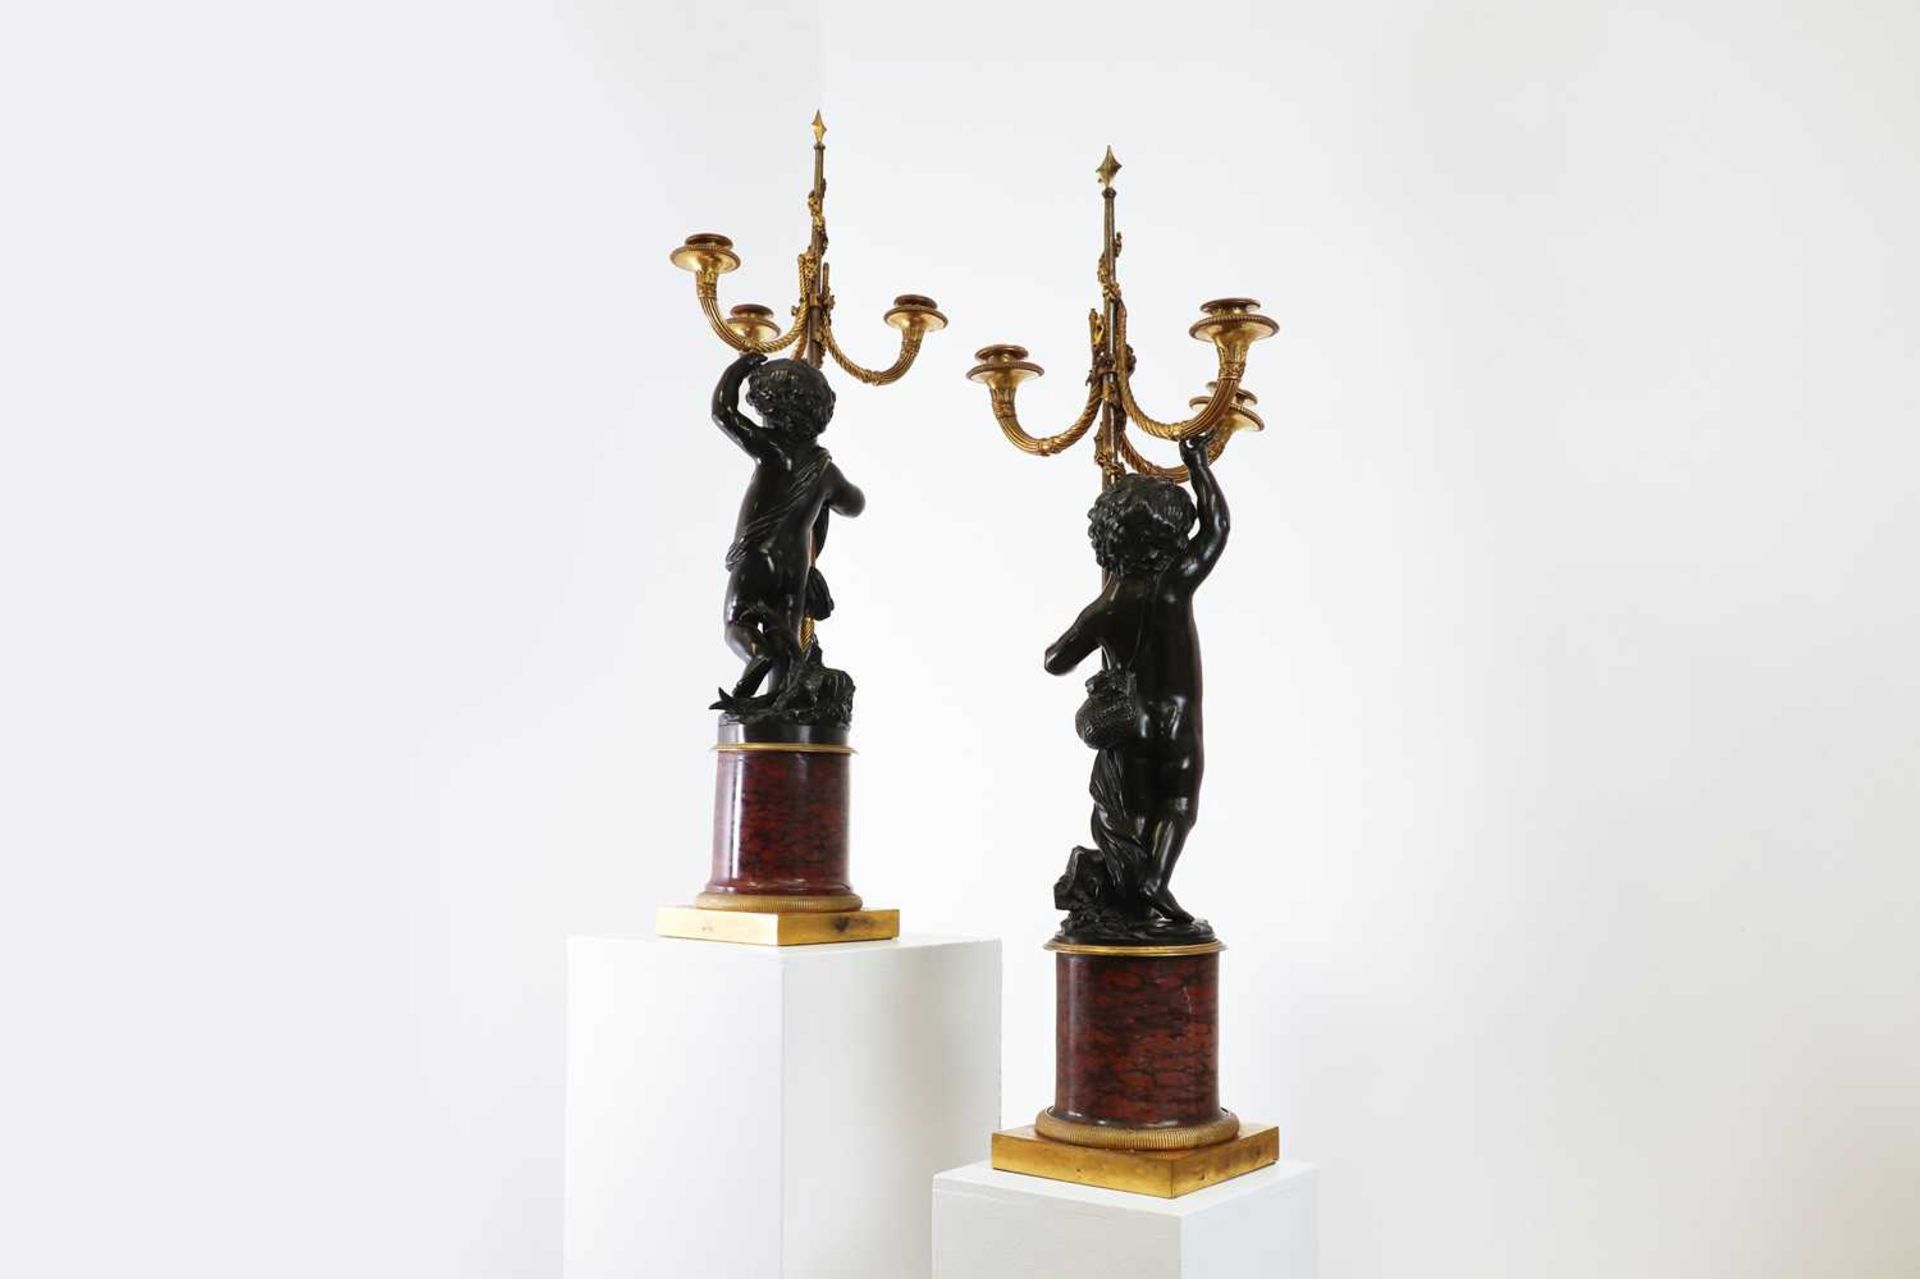 A pair of French Empire bronze and marble candelabra attributed to François Rémond (c.1747-1812), - Image 3 of 23